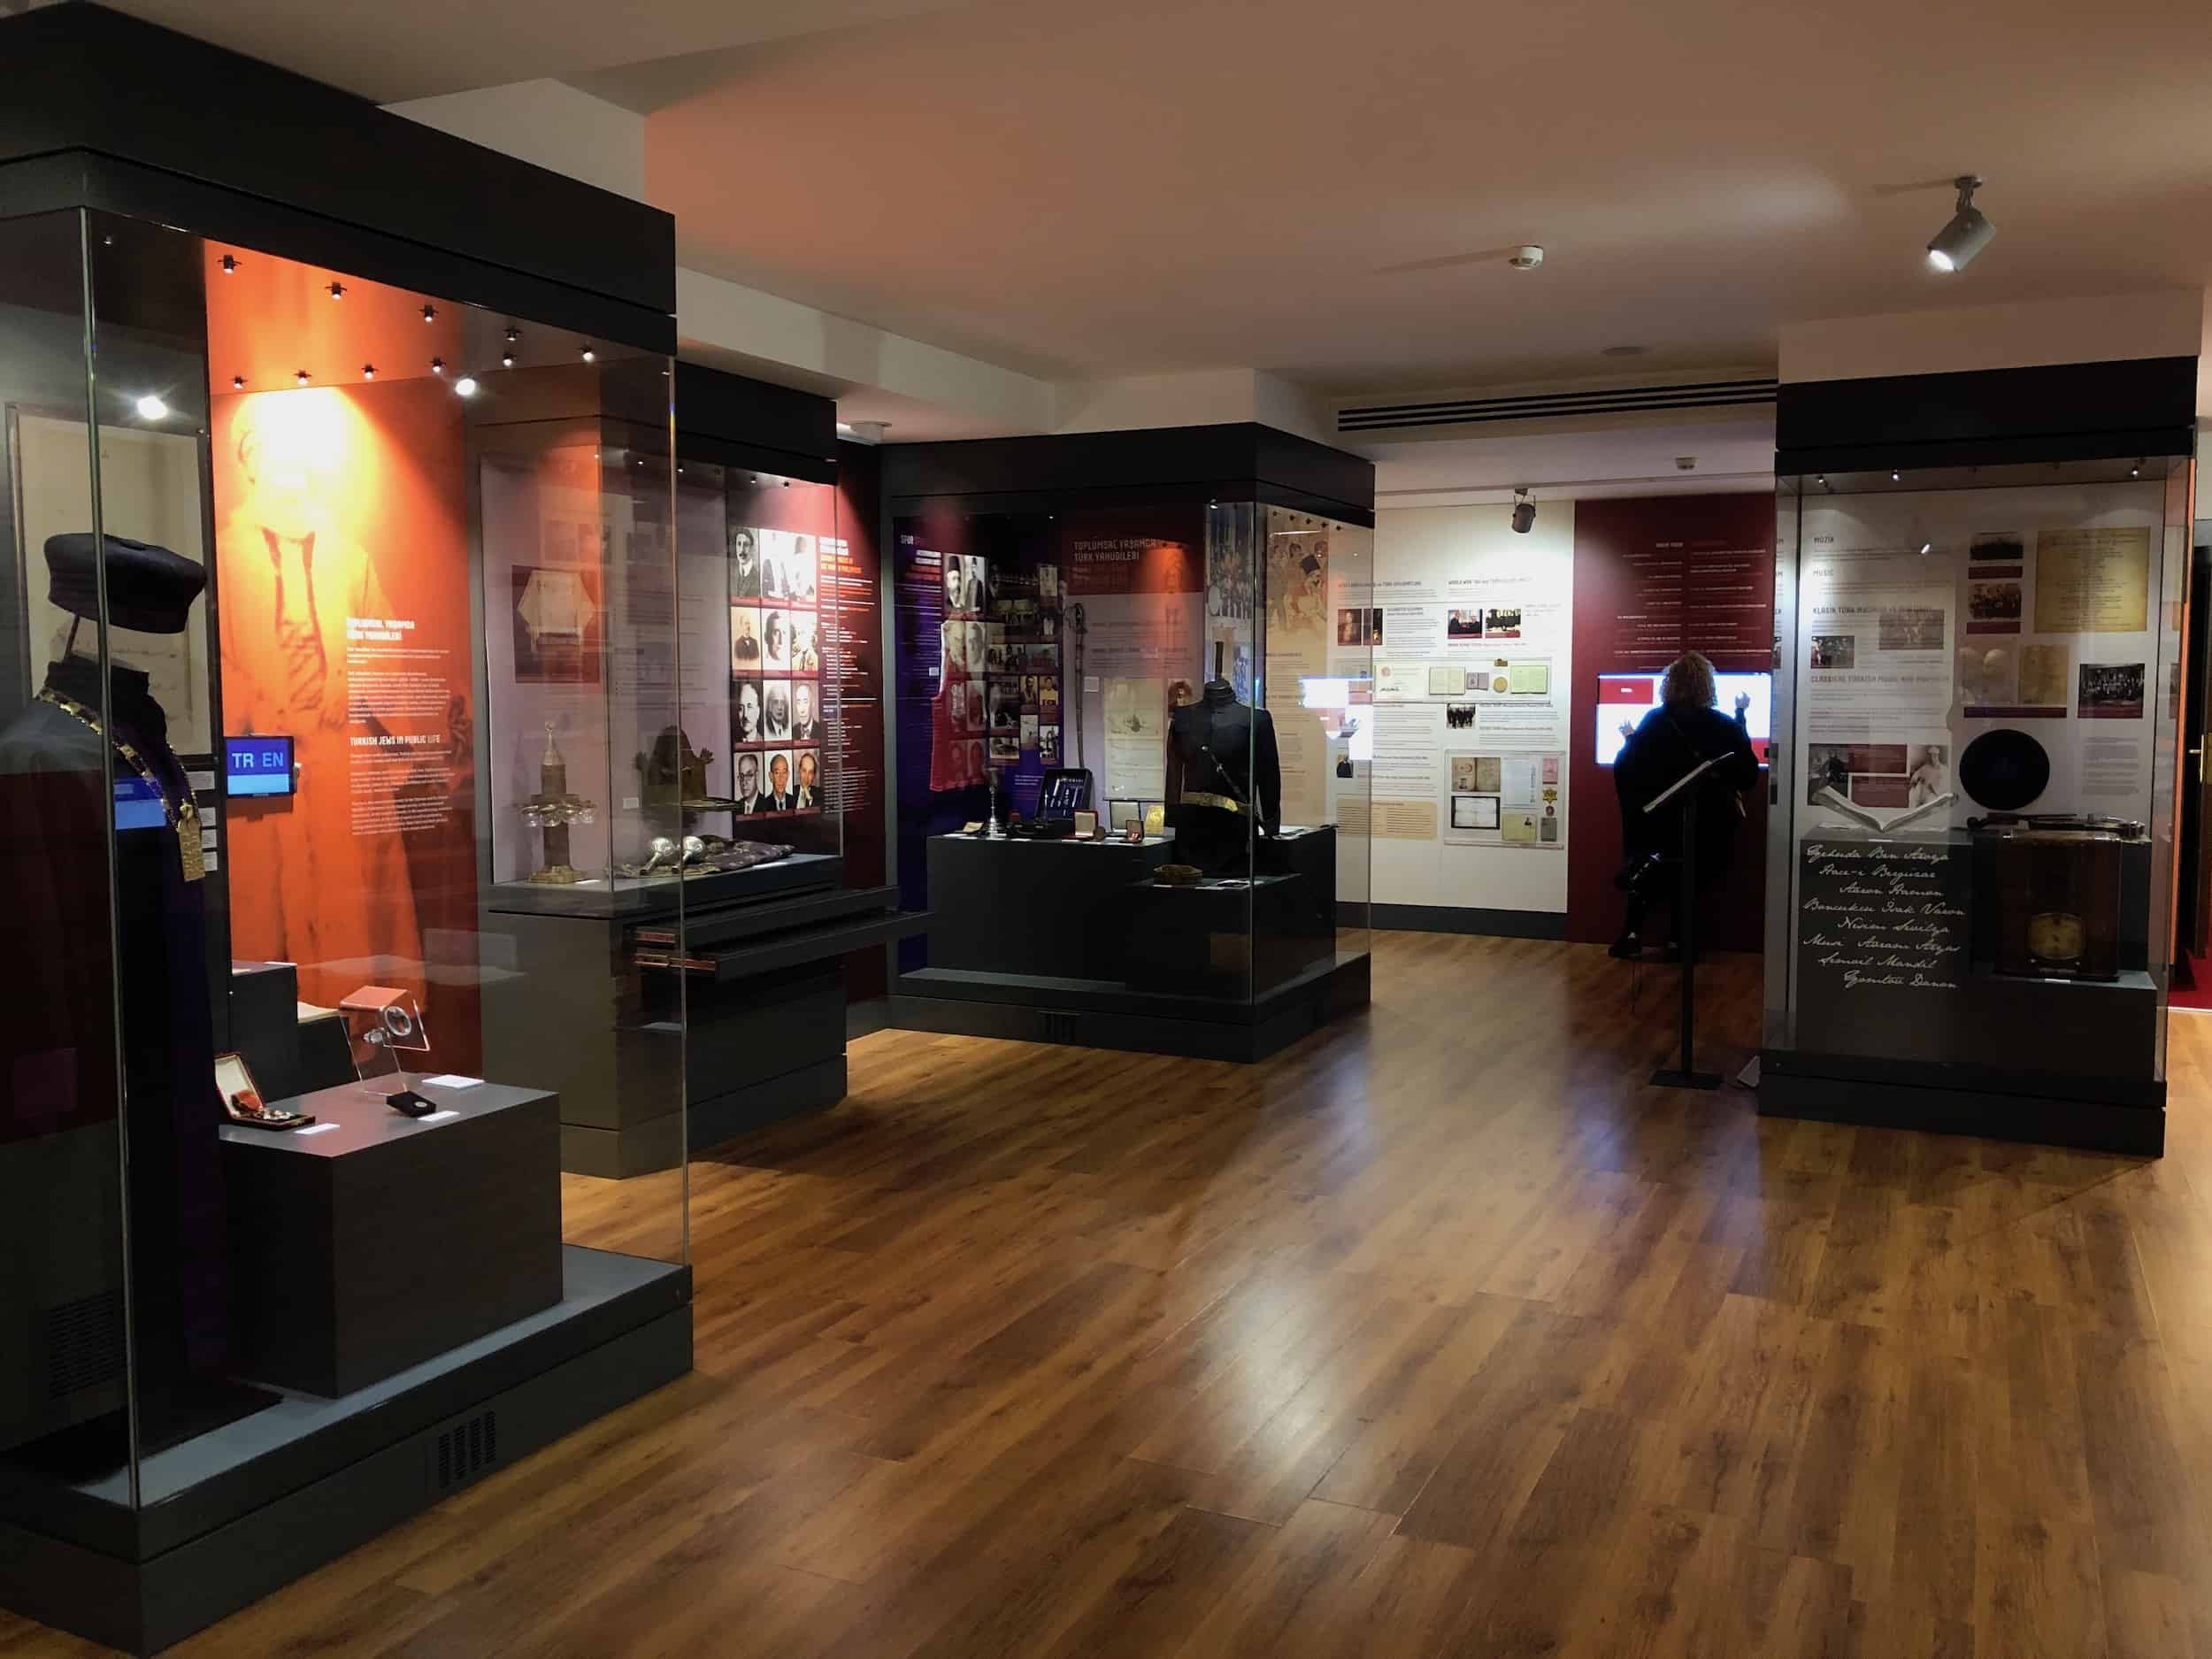 First floor at the Museum of Turkish Jews in Galata, Istanbul, Turkey